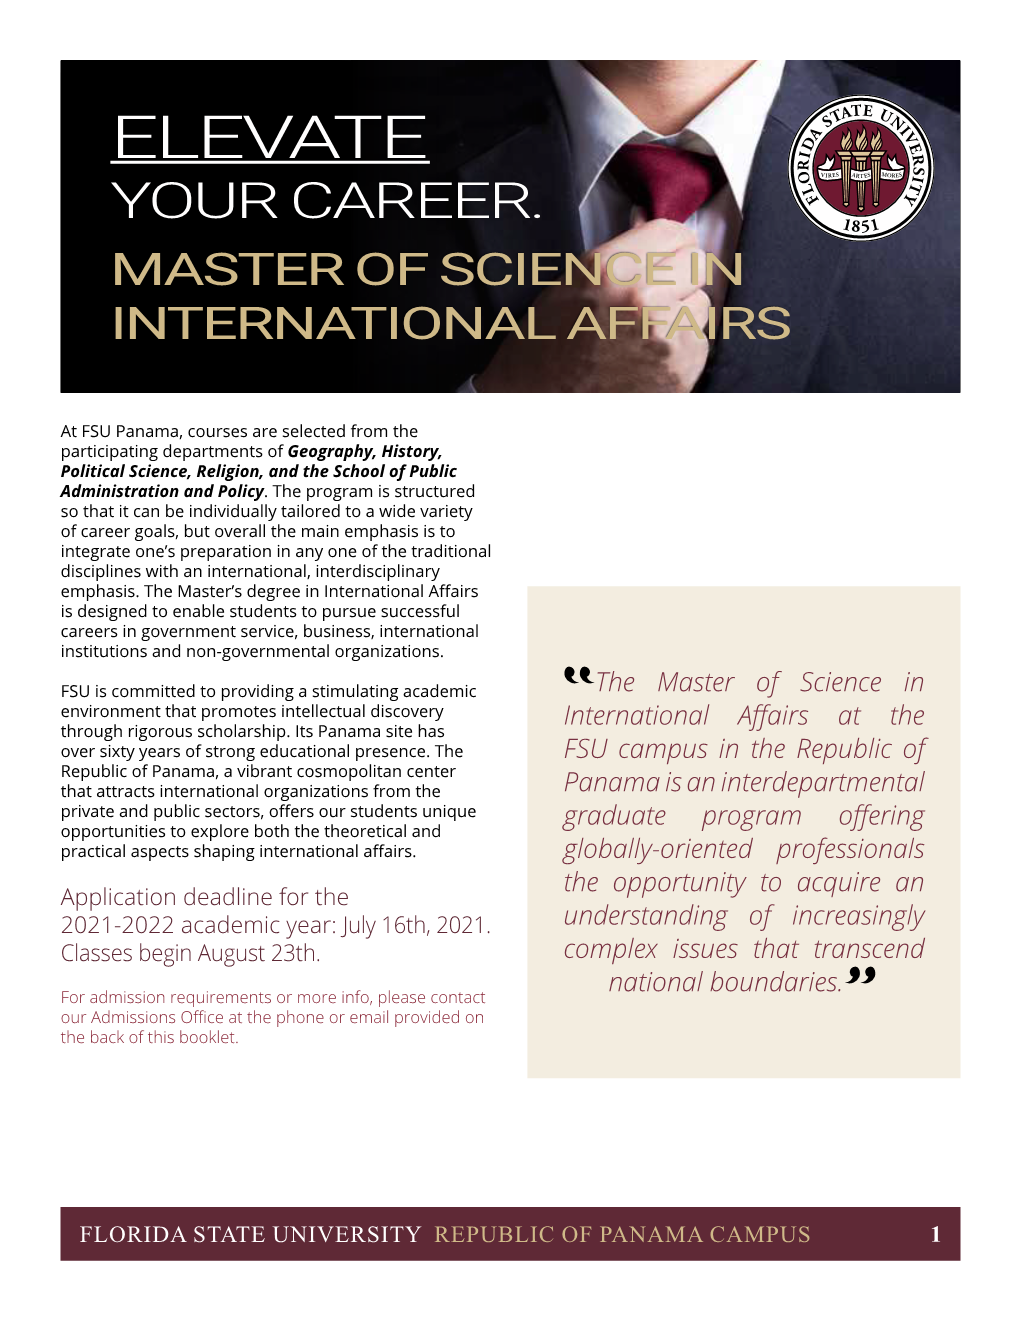 Download Our Master's Informational Brochure